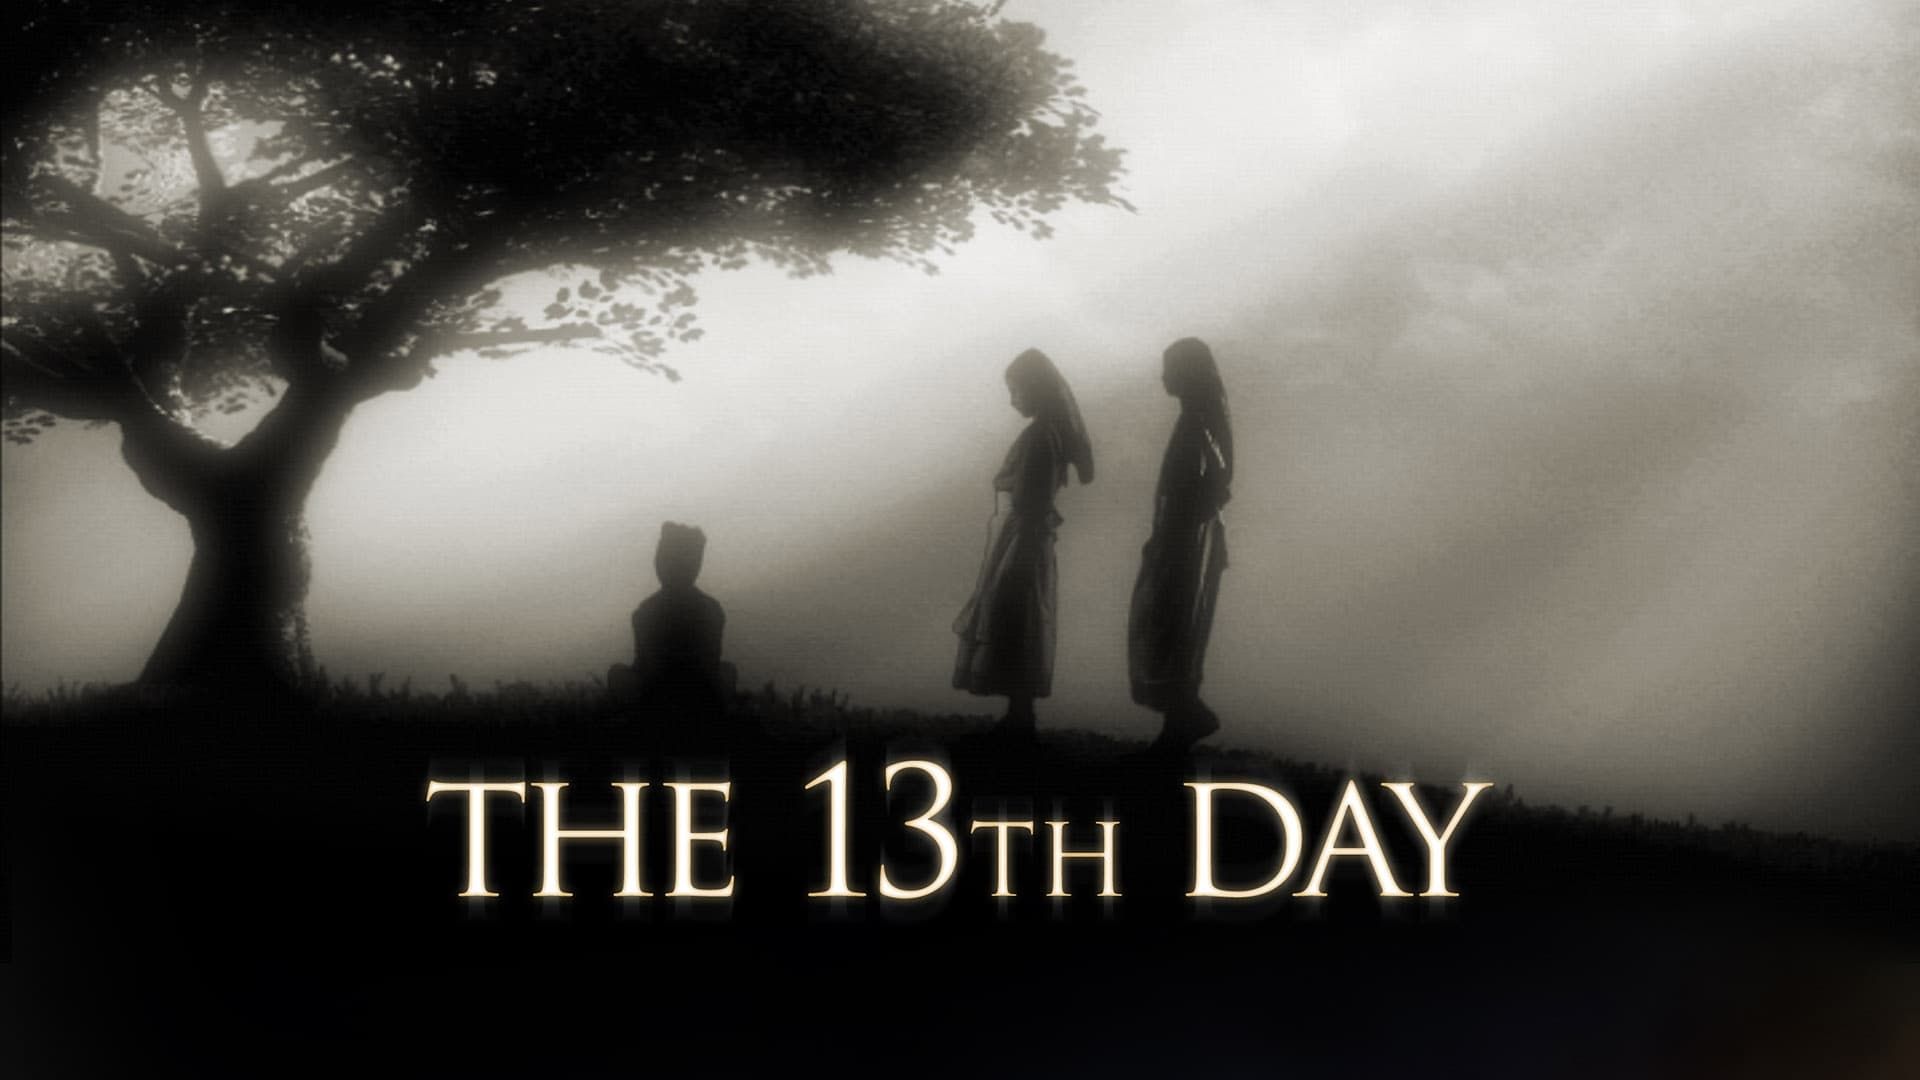 The 13th Day background